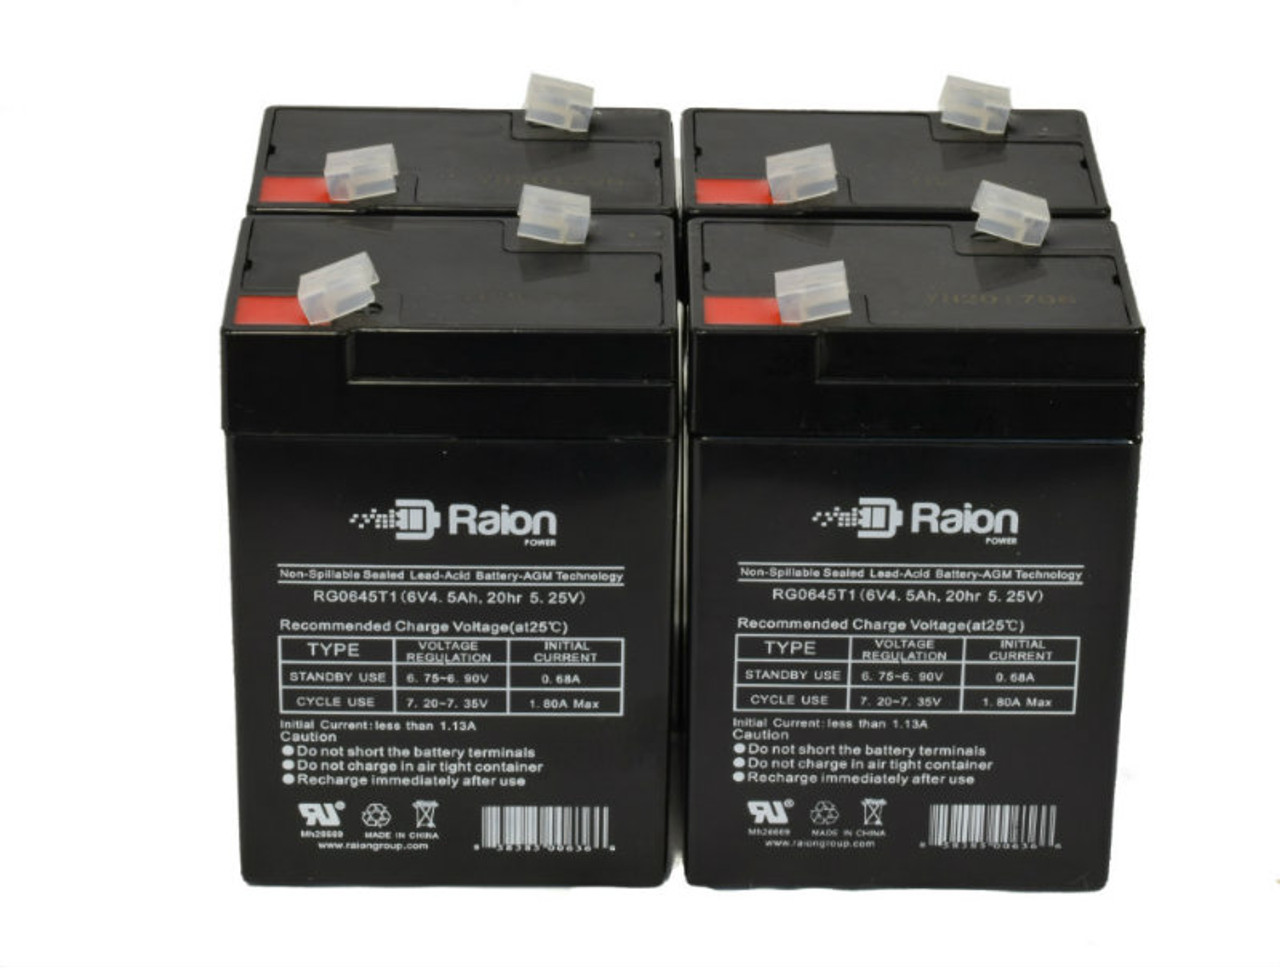 Raion Power 6V 4.5Ah Replacement Emergency Light Battery for Astralite 20-0008 - 4 Pack